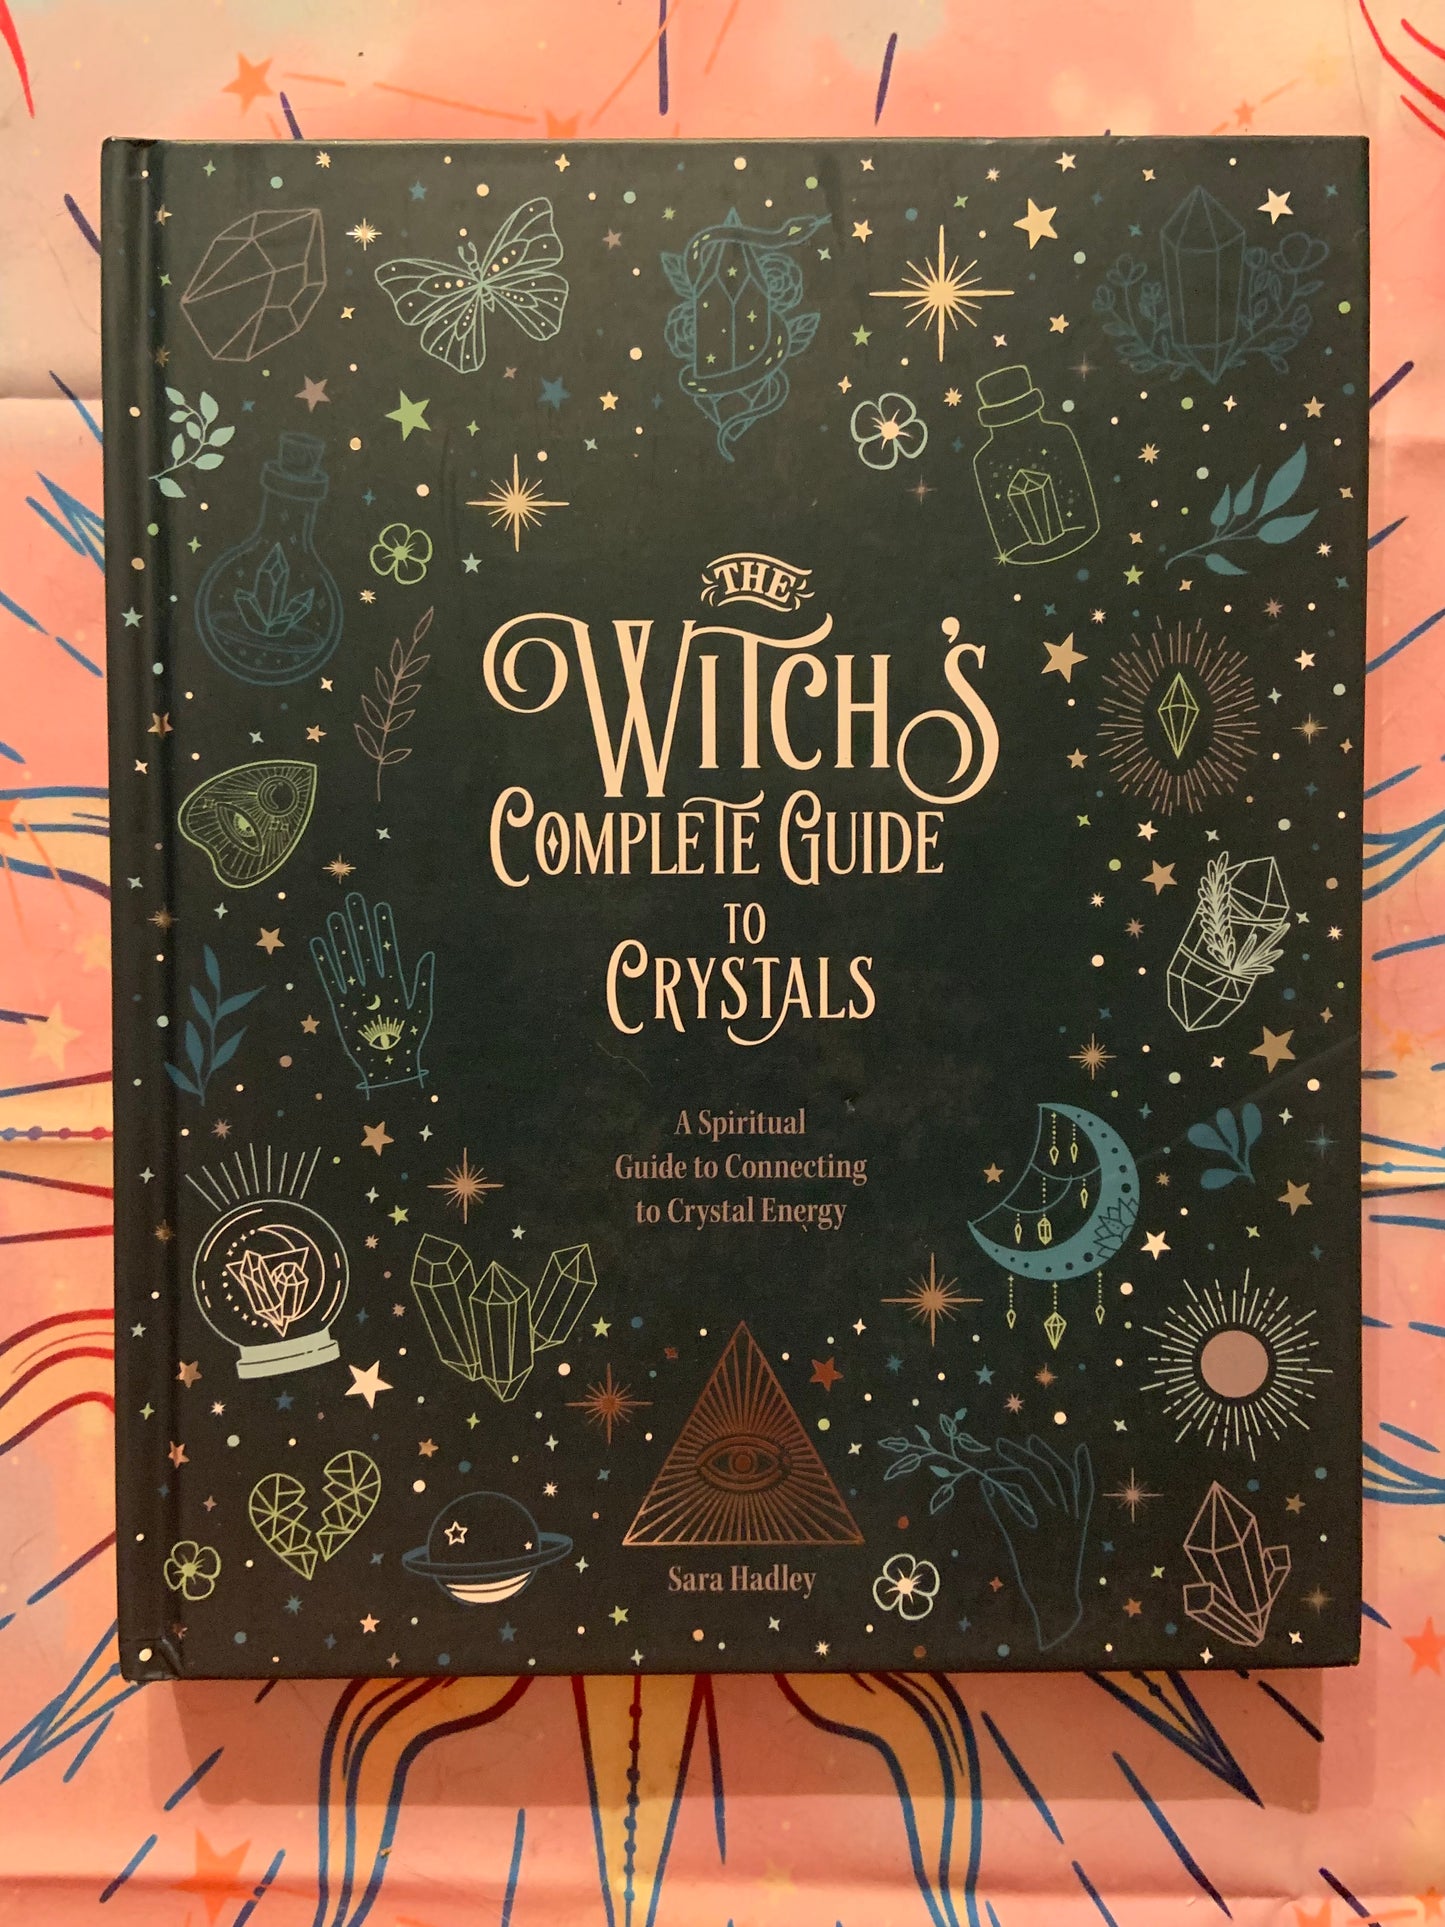 The Witch’s Complete Guide to Crystals book